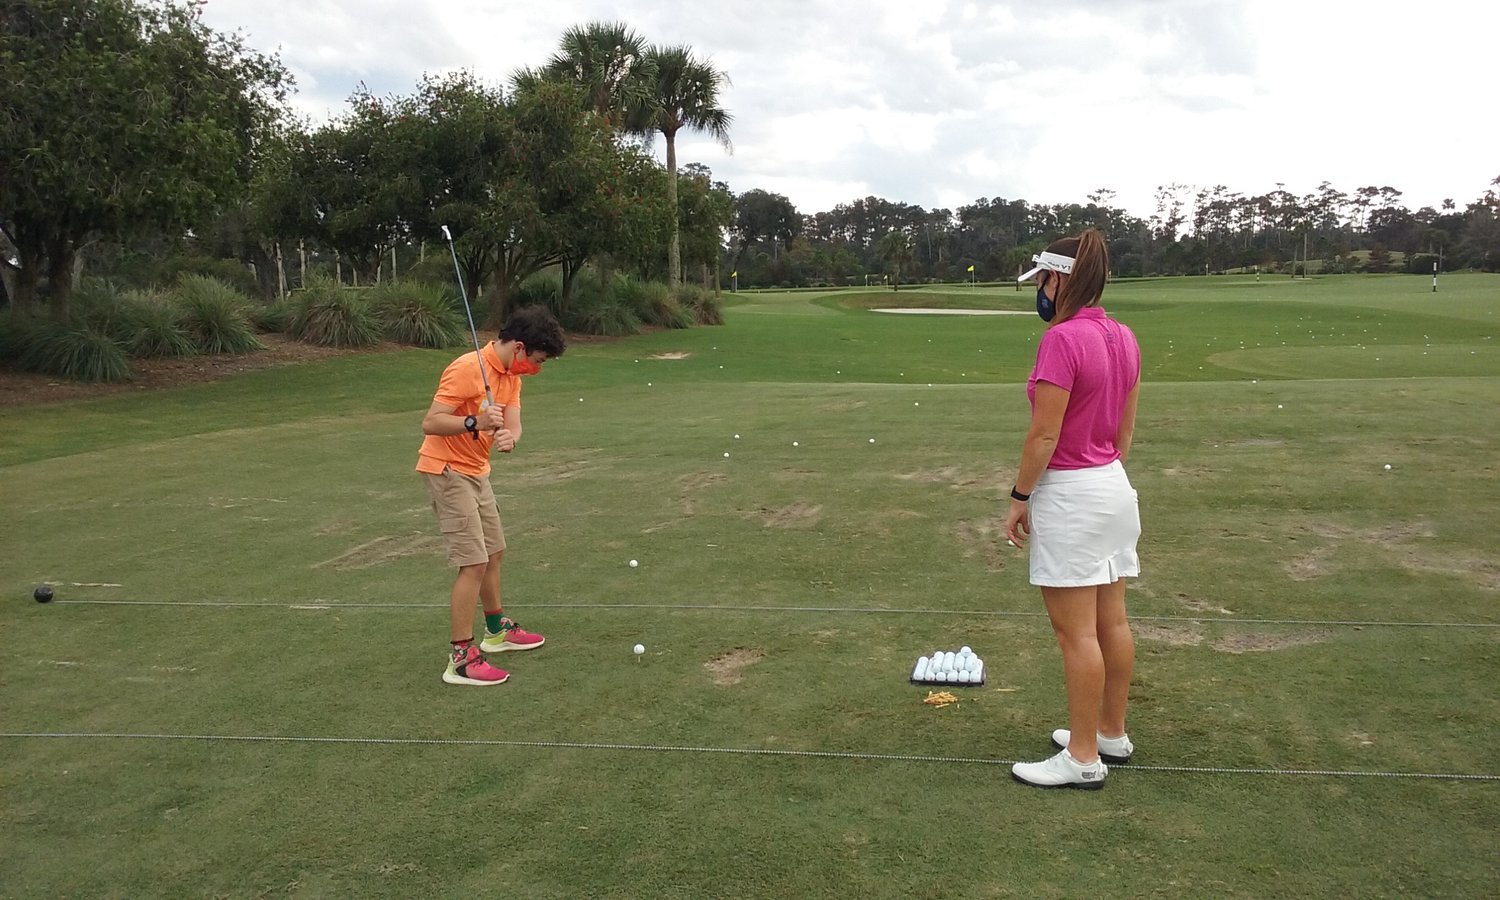 LPGA golfer Amelia Lewis instructs a young participant during the Tesori Family Foundation’s All-Star Kids Clinic.